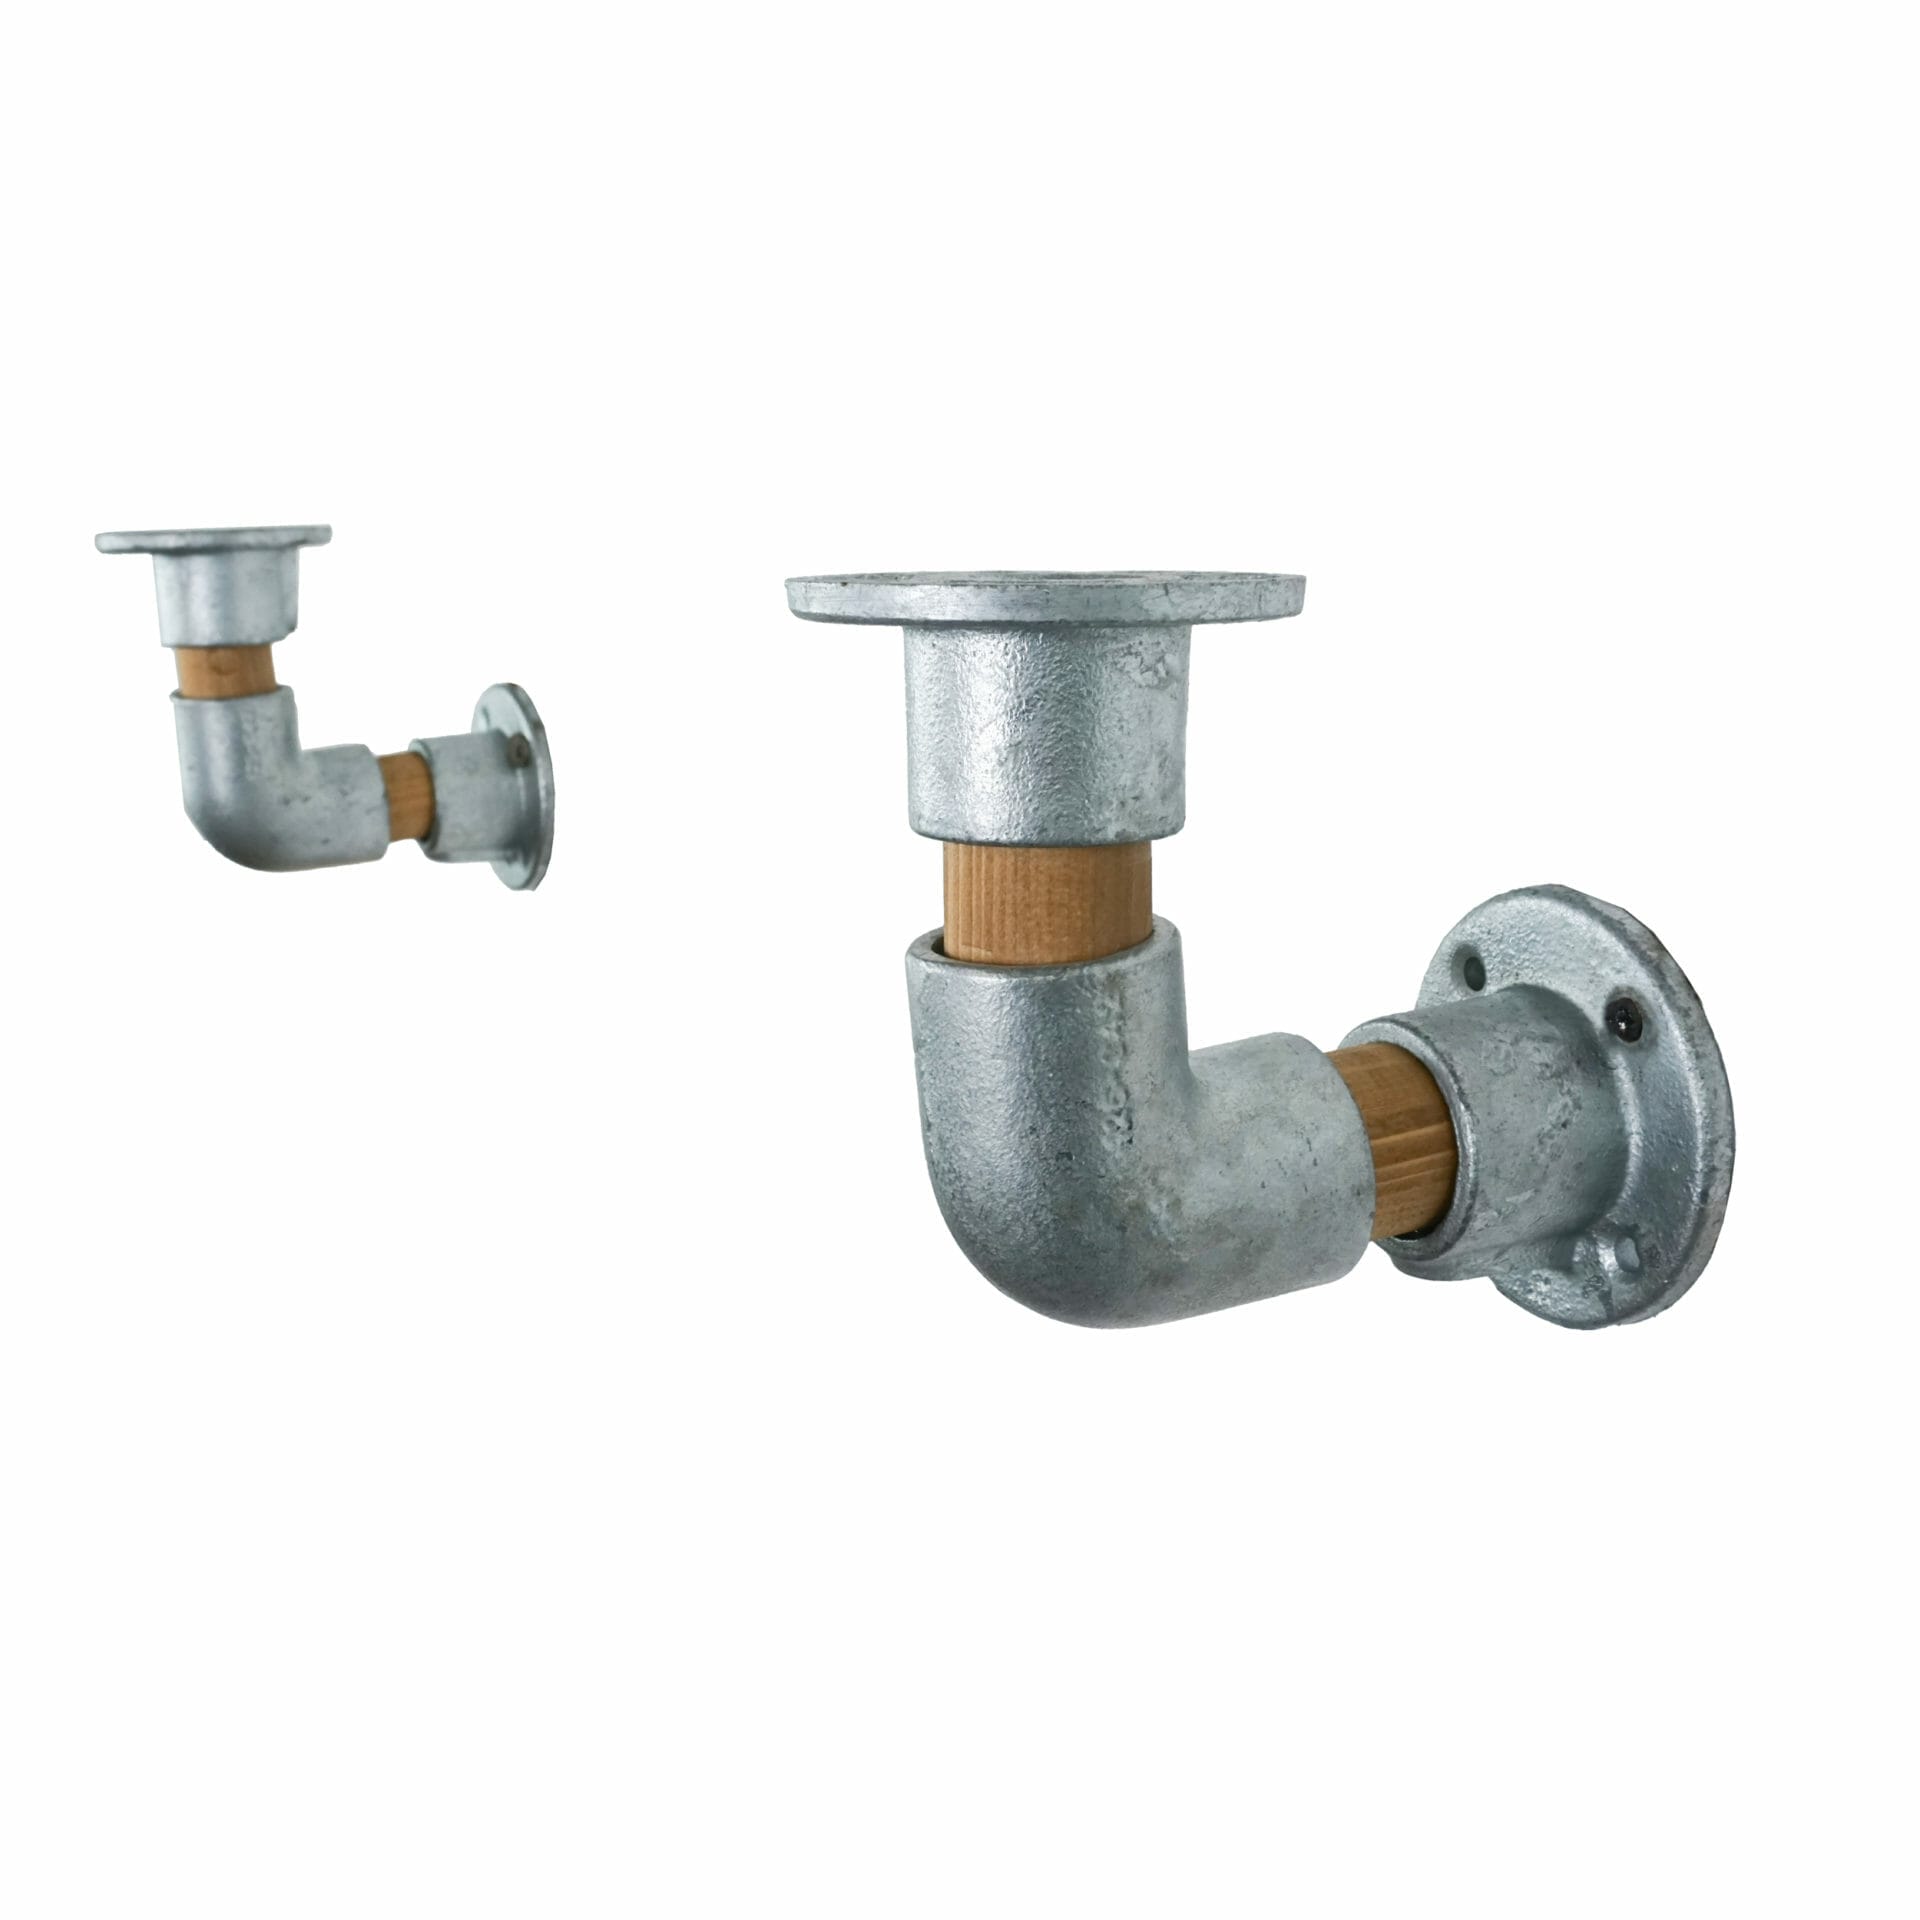 Industrial steel pipe fittings with wooden support shelf bracket